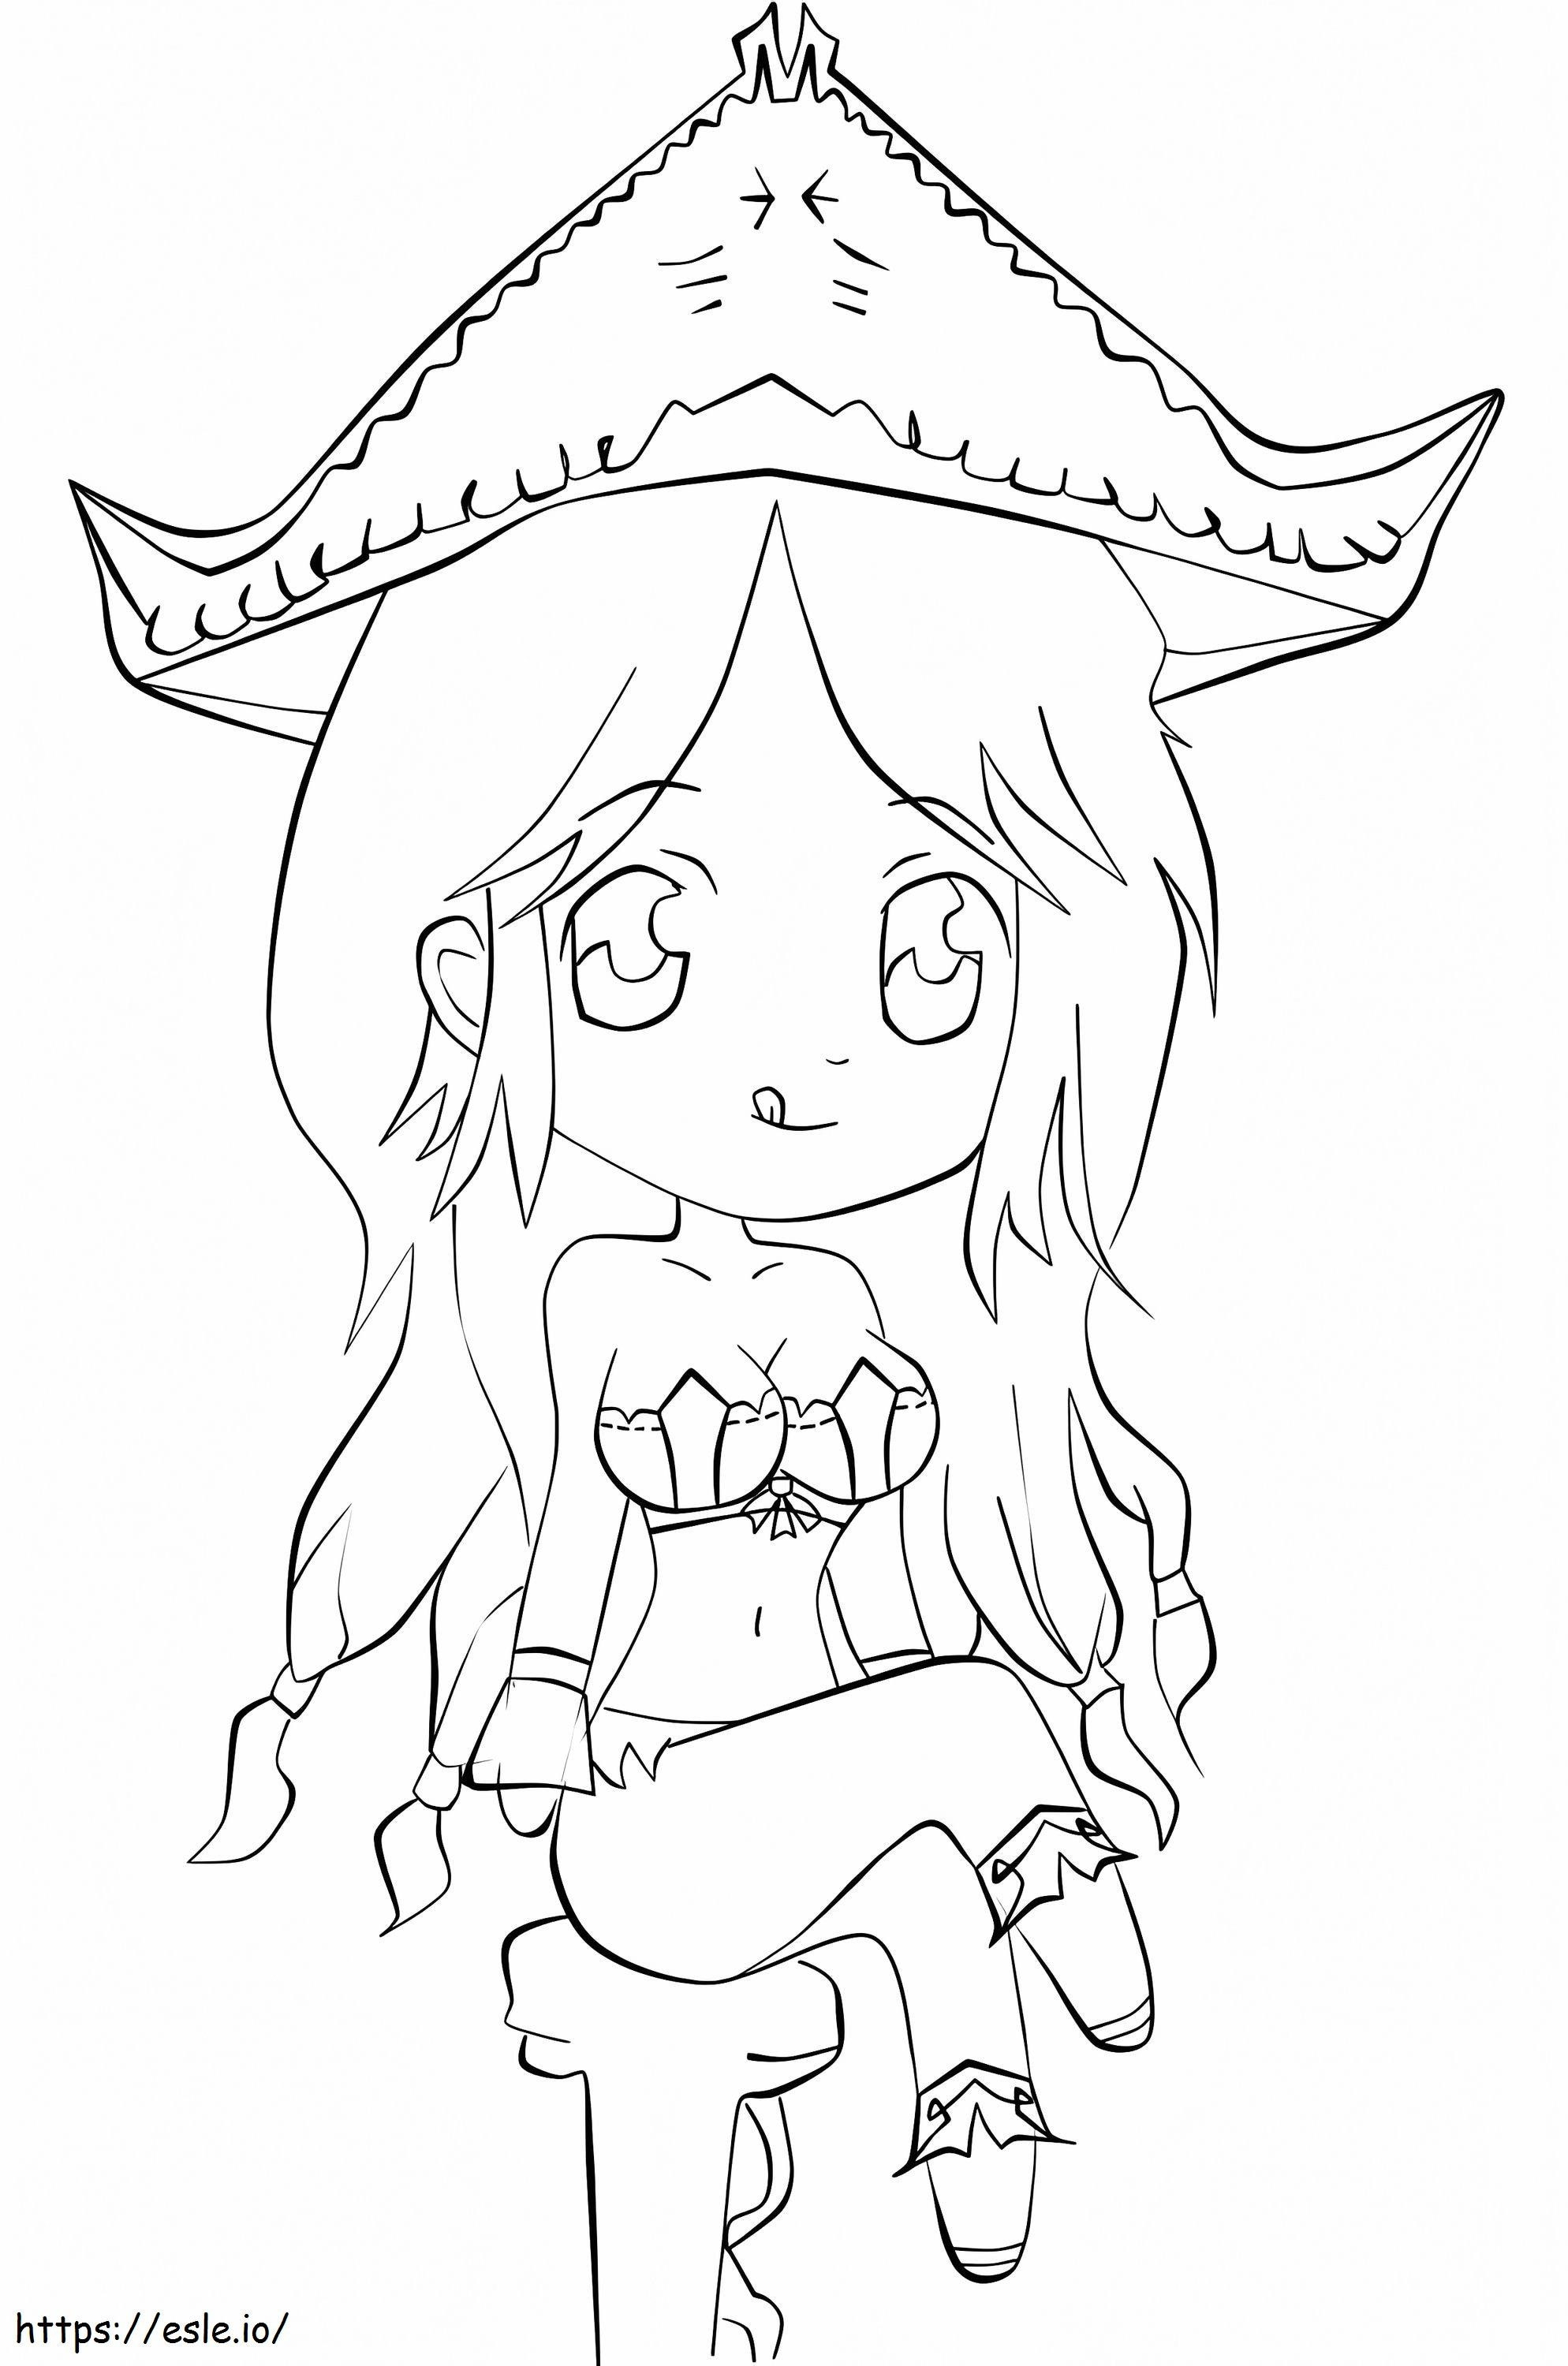 1560848267 Cute Missfortune A4 coloring page